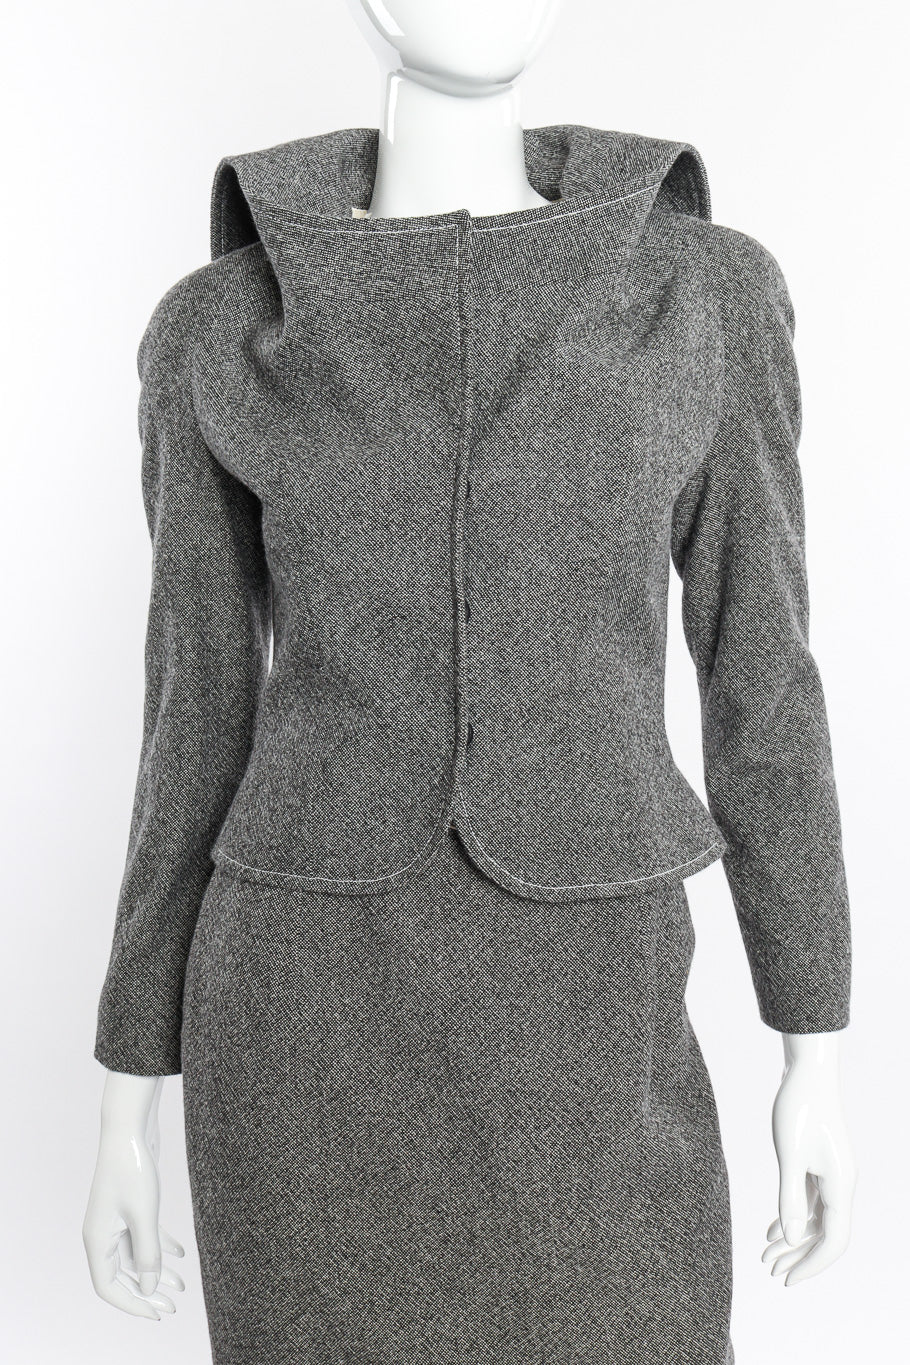 Wool Jacket & Wrap Skirt Suit by Christian Dior on mannequin front close collar up @recessla